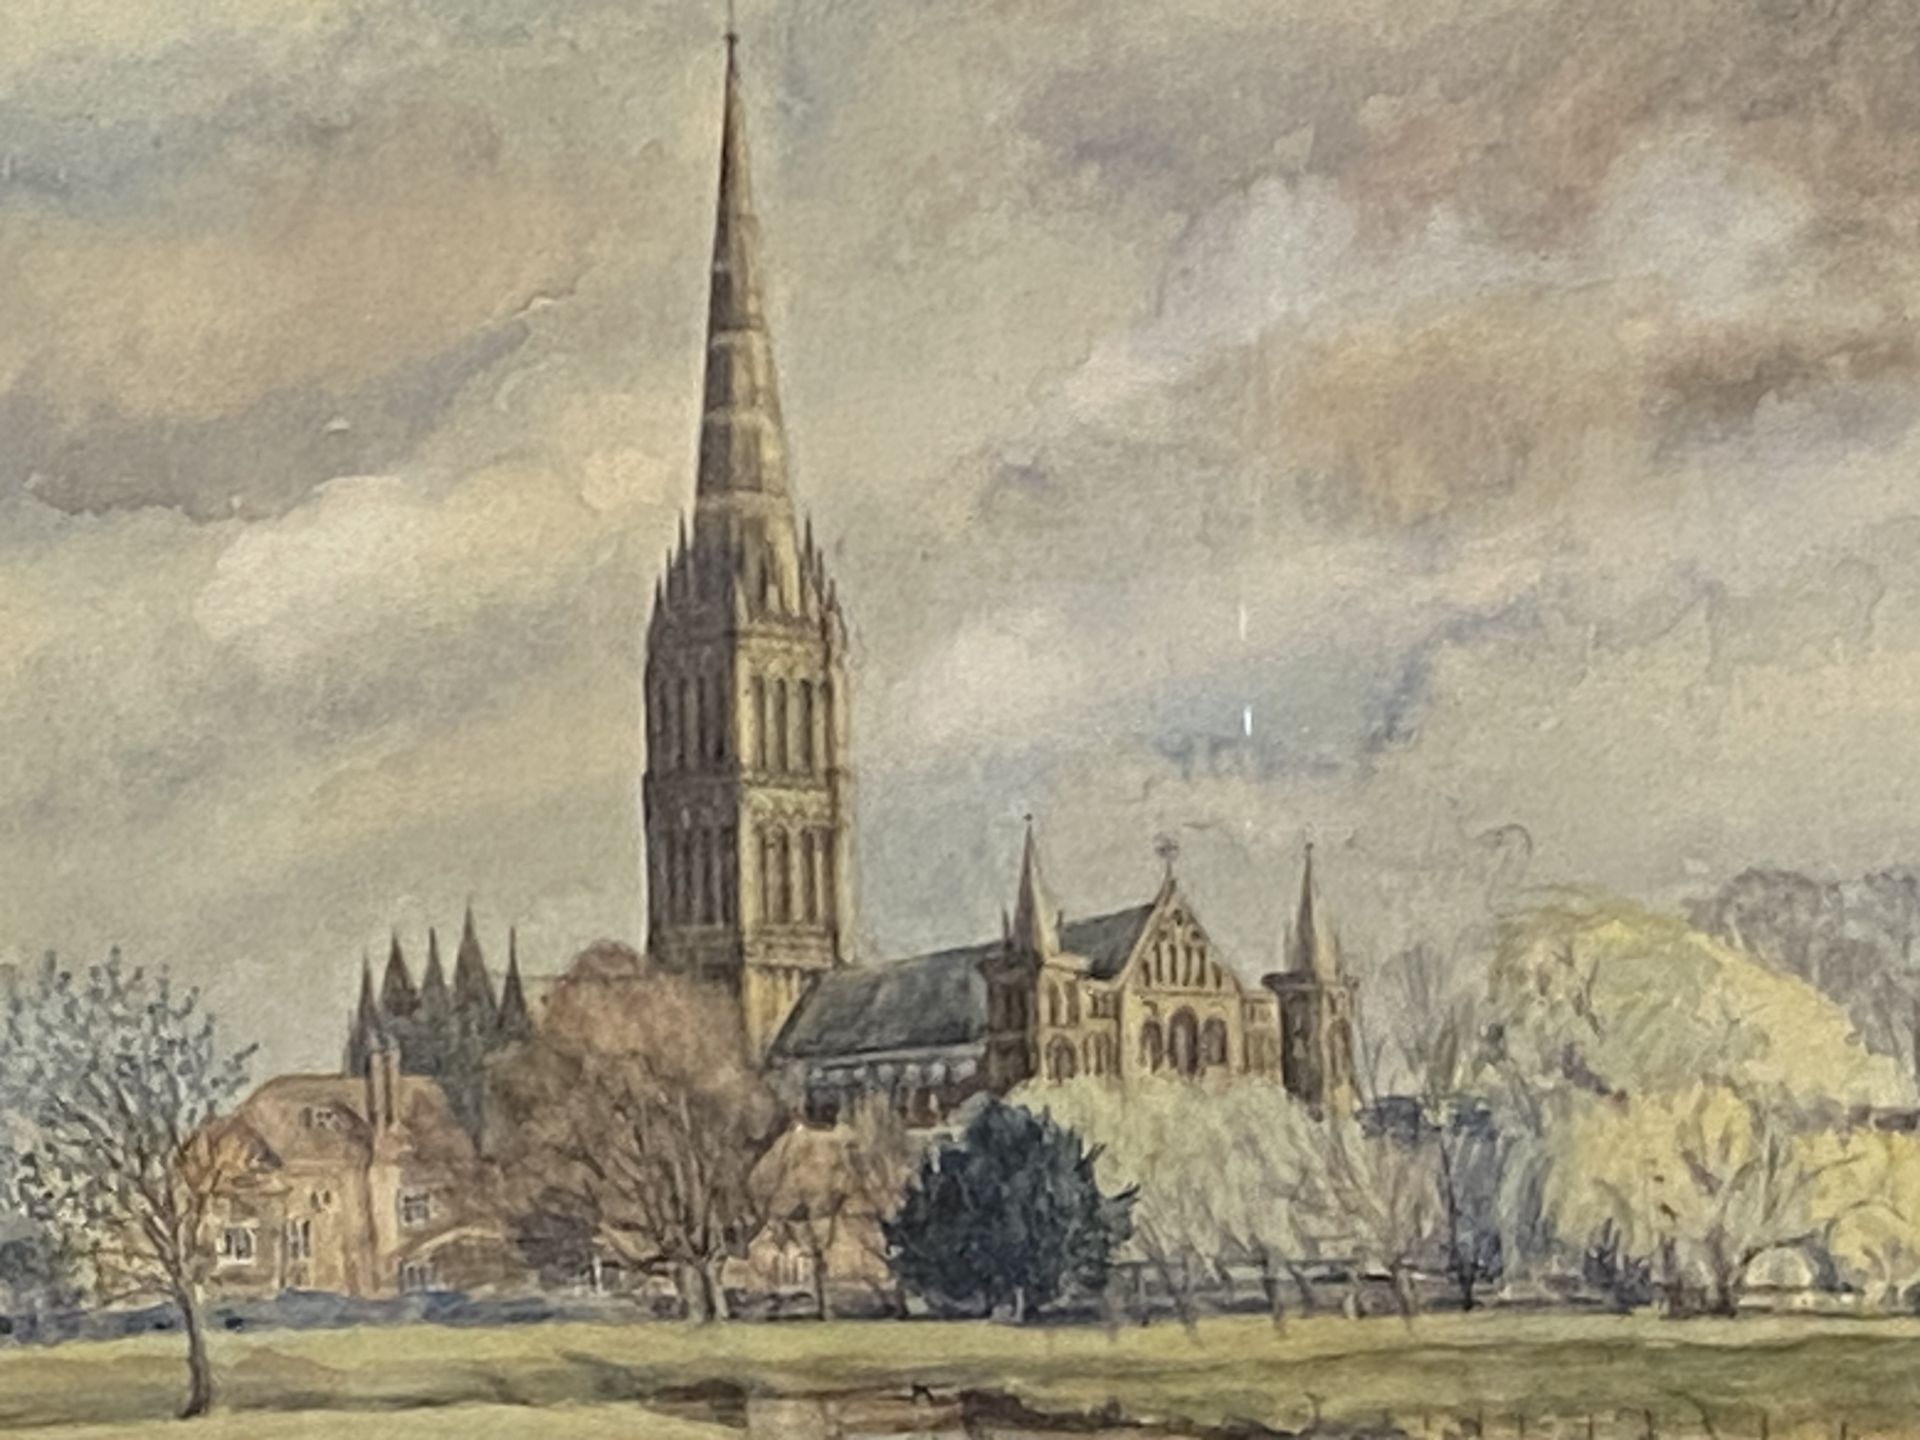 Framed and glazed watercolour of Salisbury cathedral - Image 3 of 4